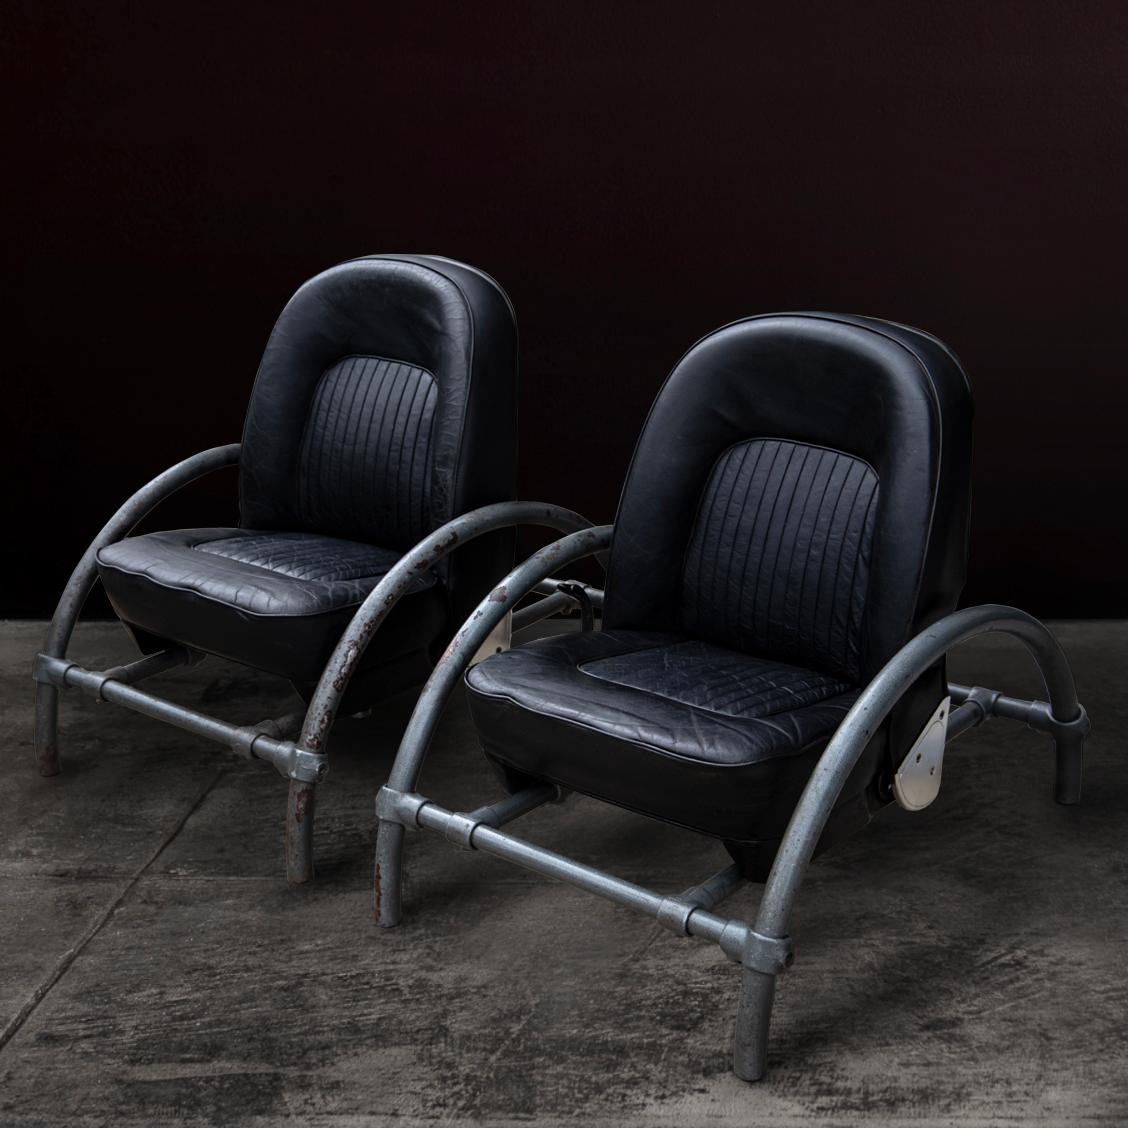 A pair of black leather early production of the iconic Rover chair synonymous as a piece of conceptual art and eighties loft living. The first furniture design conceived by an industrial designer, now highly collectable as a post-modern classic.